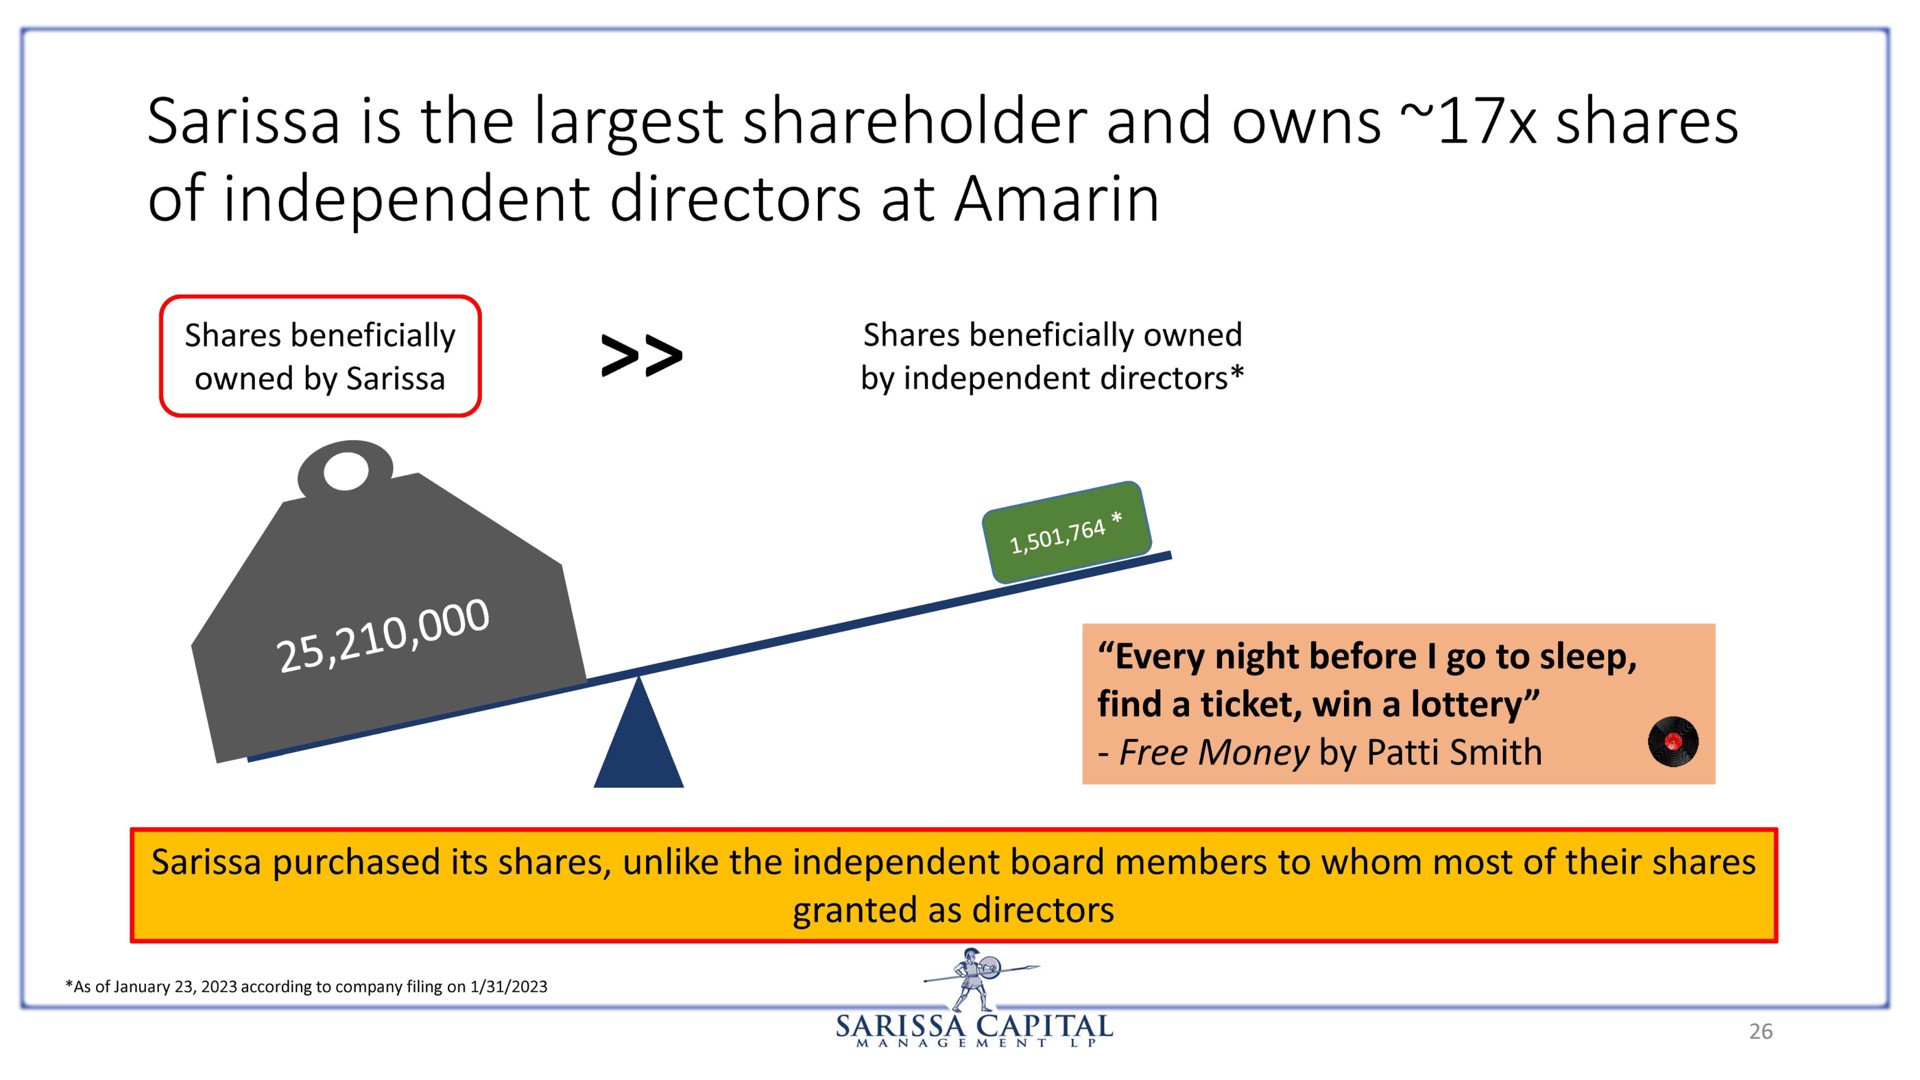 is the shareholder and owns shares of independent directors at amarin | Sarissa Capital